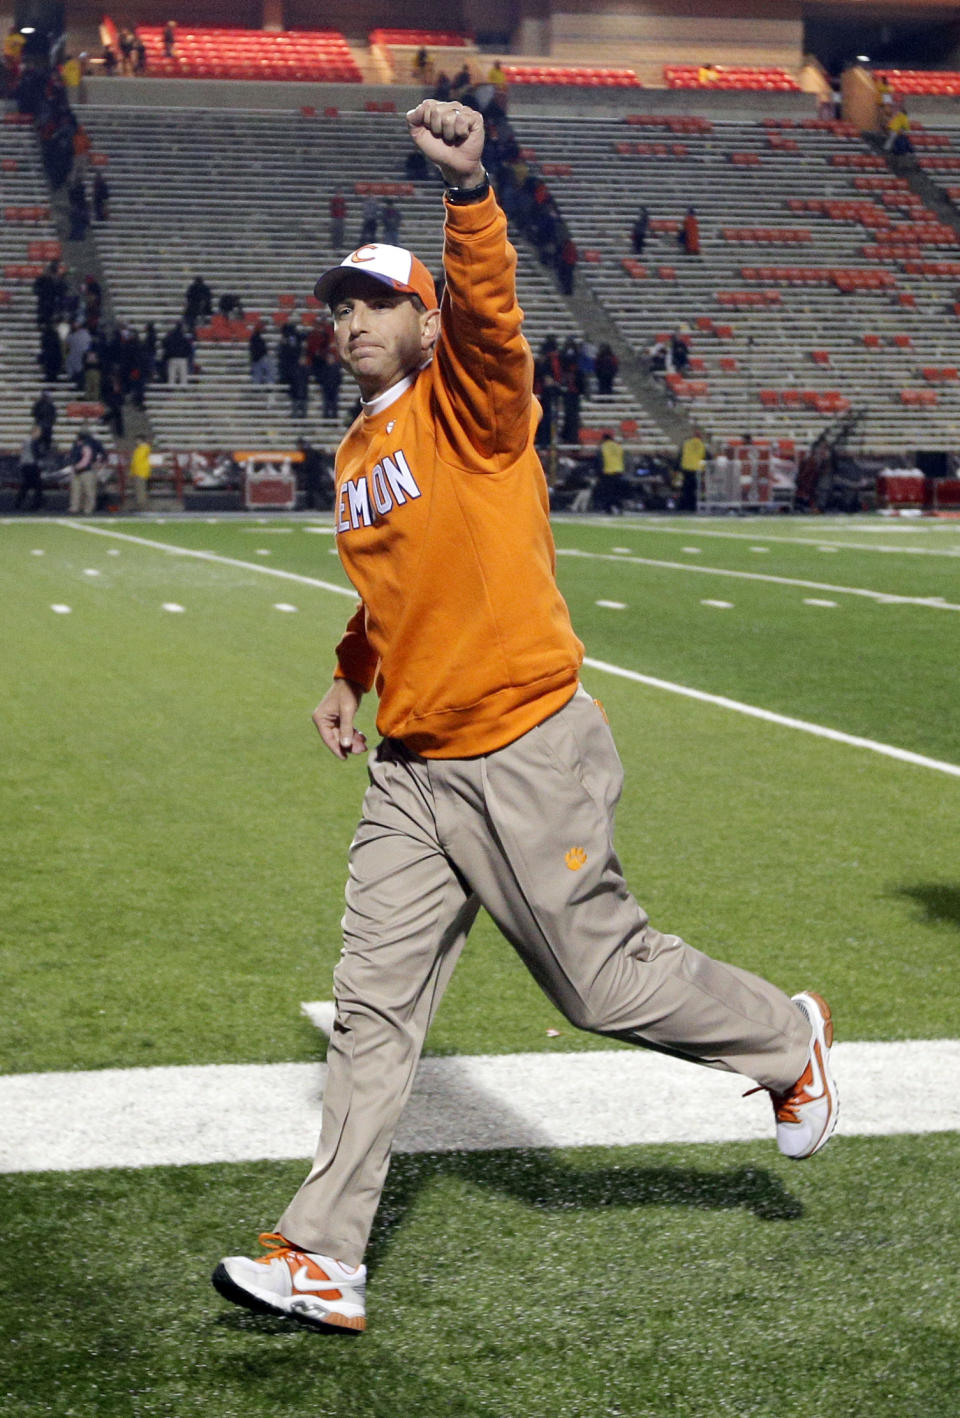 FILE - In this Oct. 26, 2013, file photo, Clemson head coach Dabo Swinney acknowledges fans as he runs off the field after an NCAA college football game against Maryland in College Park, Md. Swinney received a new, eight-year contract and a raise that increased his total pay for next season to $3.15 million. (AP Photo/Patrick Semansky, File)